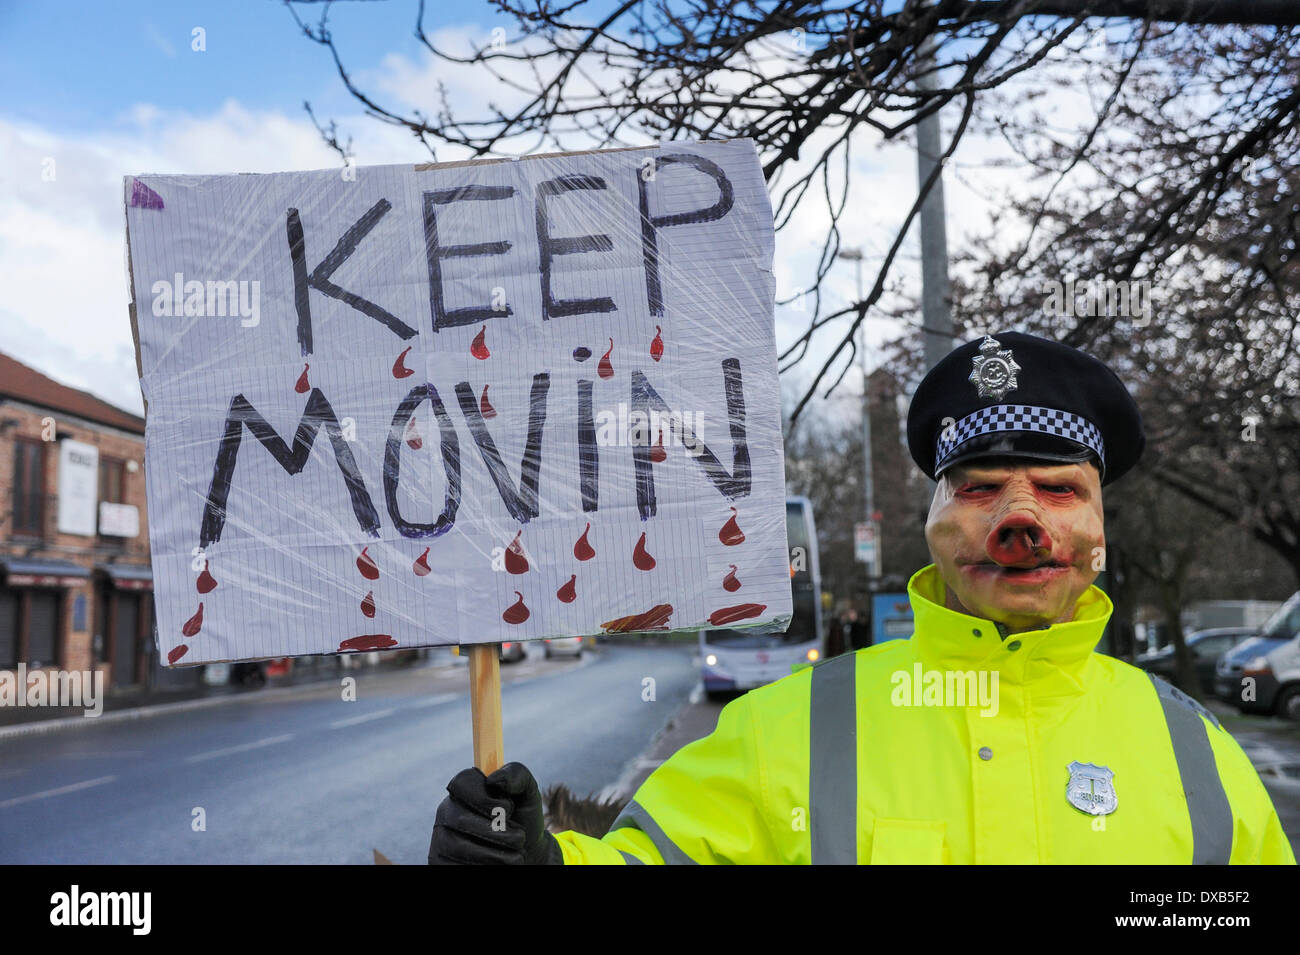 Swinton, Salford, Manchester, UK . 22nd March 2014. Anti-fracking campaigners protest outside Swinton police station, Salford, Manchester. Protester dressed as a policeman wearing a pig mask holding a sign 'Move on'. Credit:  Dave Ellison/Alamy Live News Stock Photo